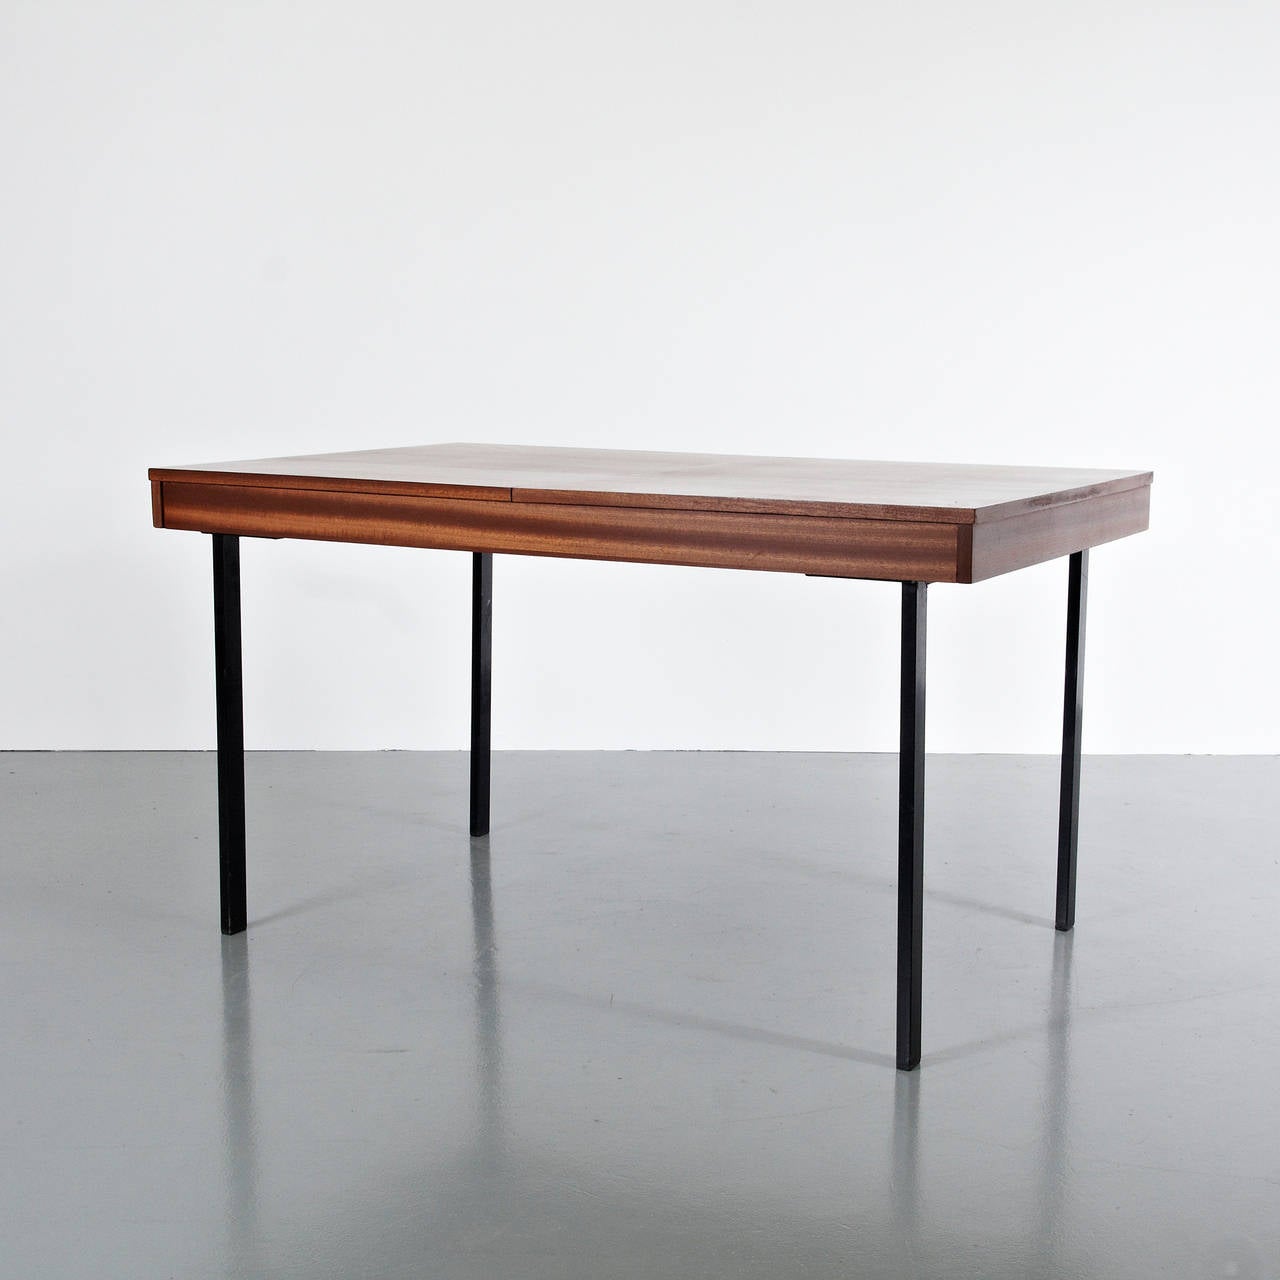 French Pierre Guariche Adjustable Extension Dining Table for Meurop, circa 1950 For Sale